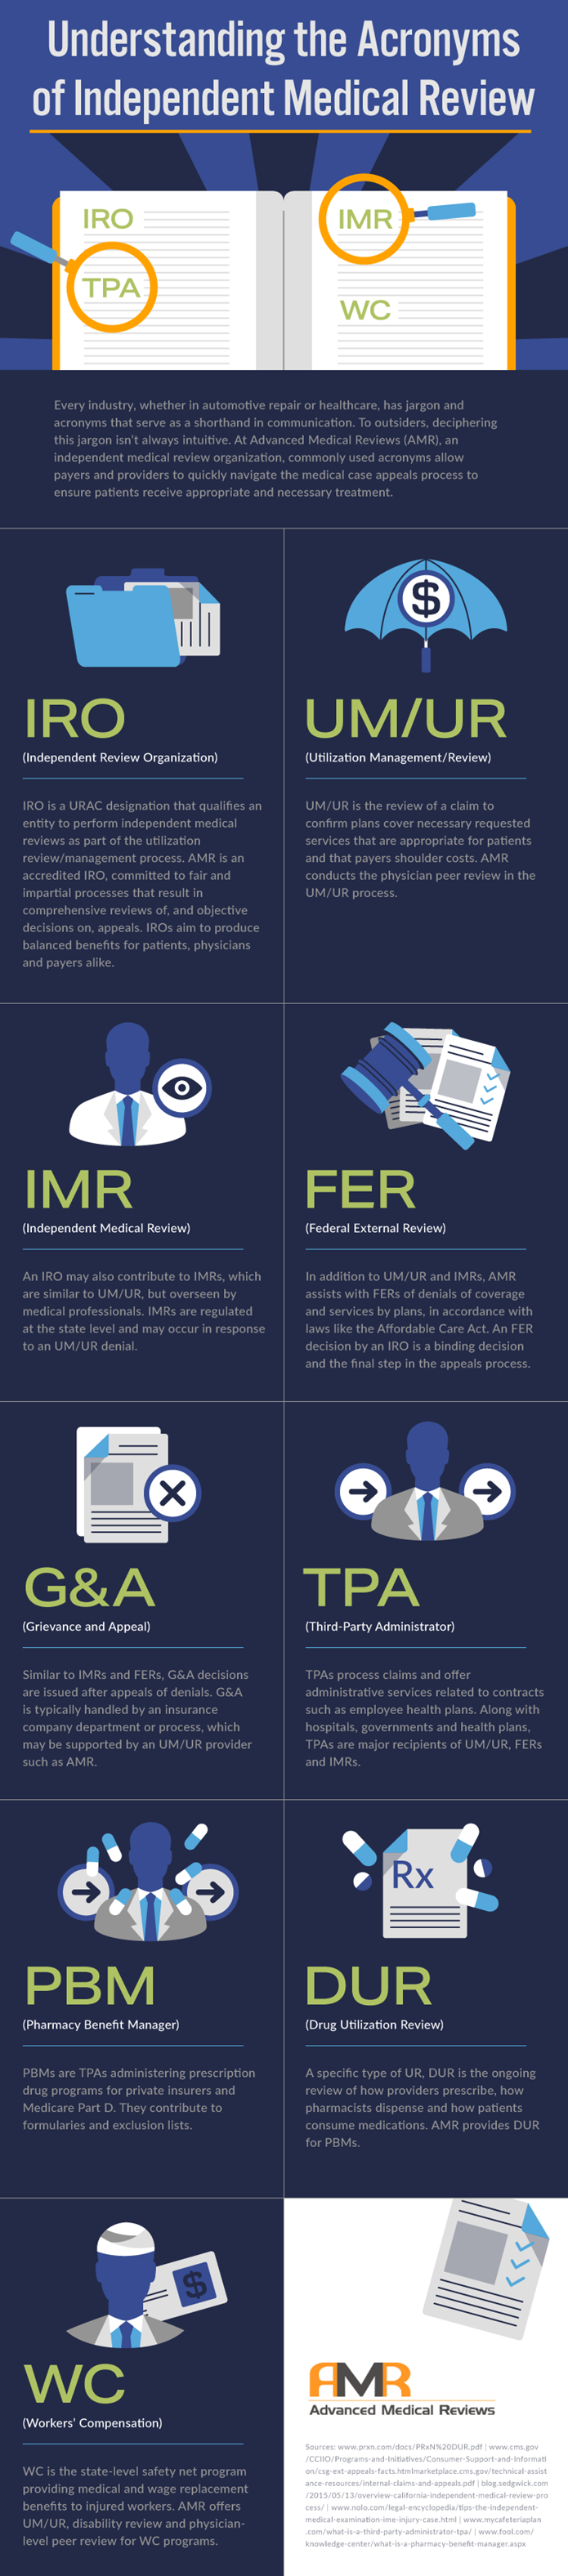 An infographic outlining the top nine healthcare acronyms from the independent medical review industry.